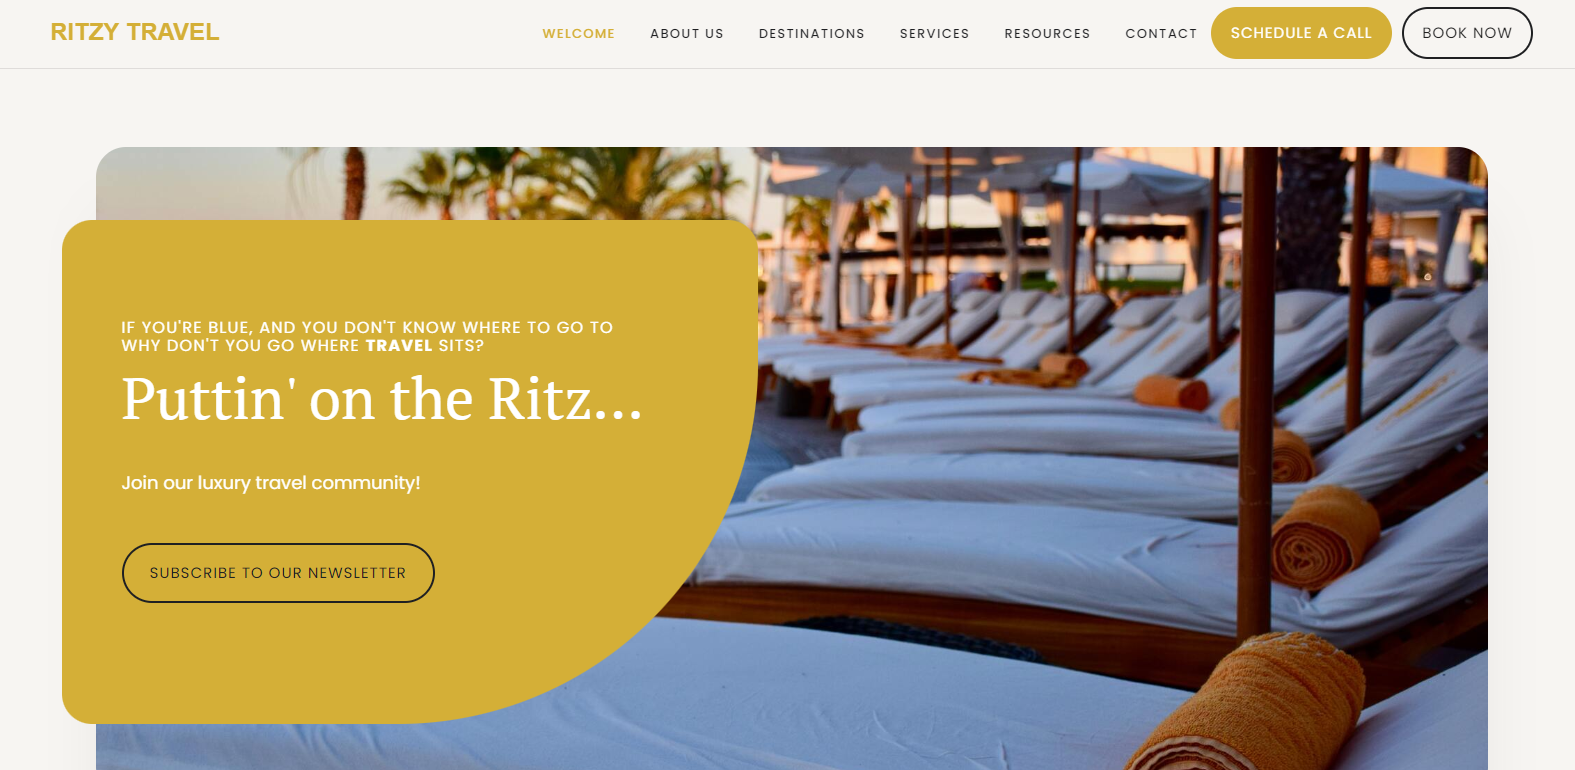 Ritzy travel home page image